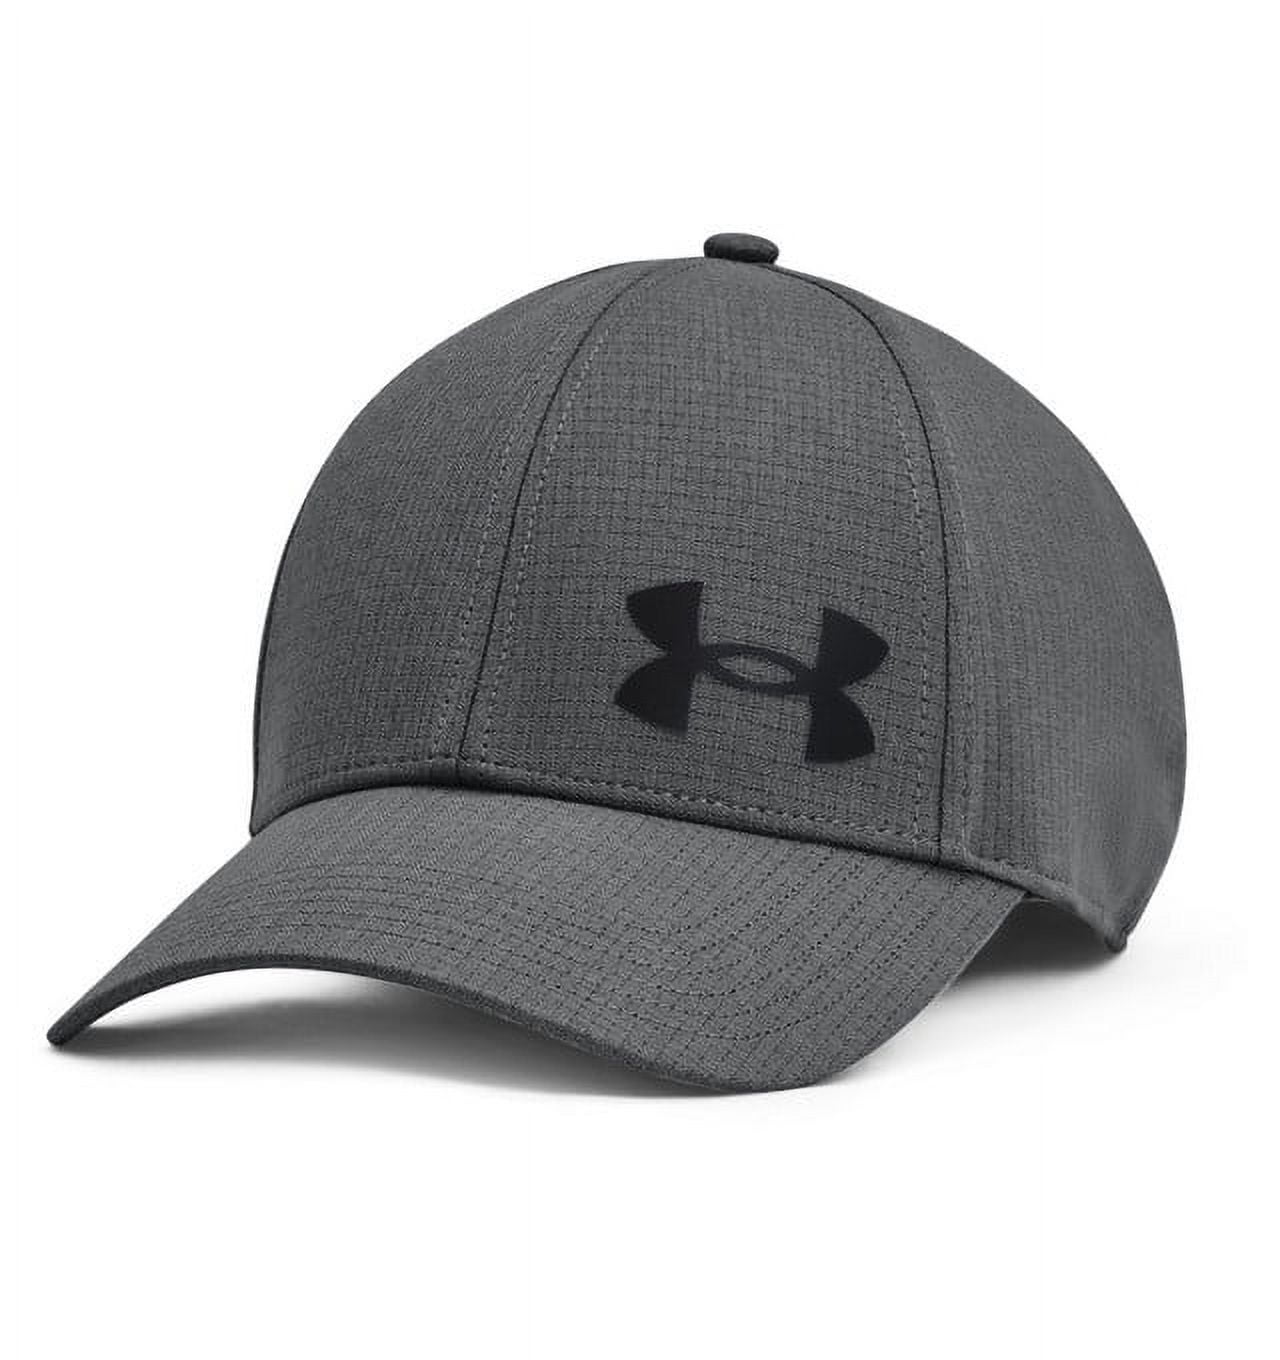 Under Armour 1361530-012-S/M Men's Iso-Chill ArmourVent Stretch